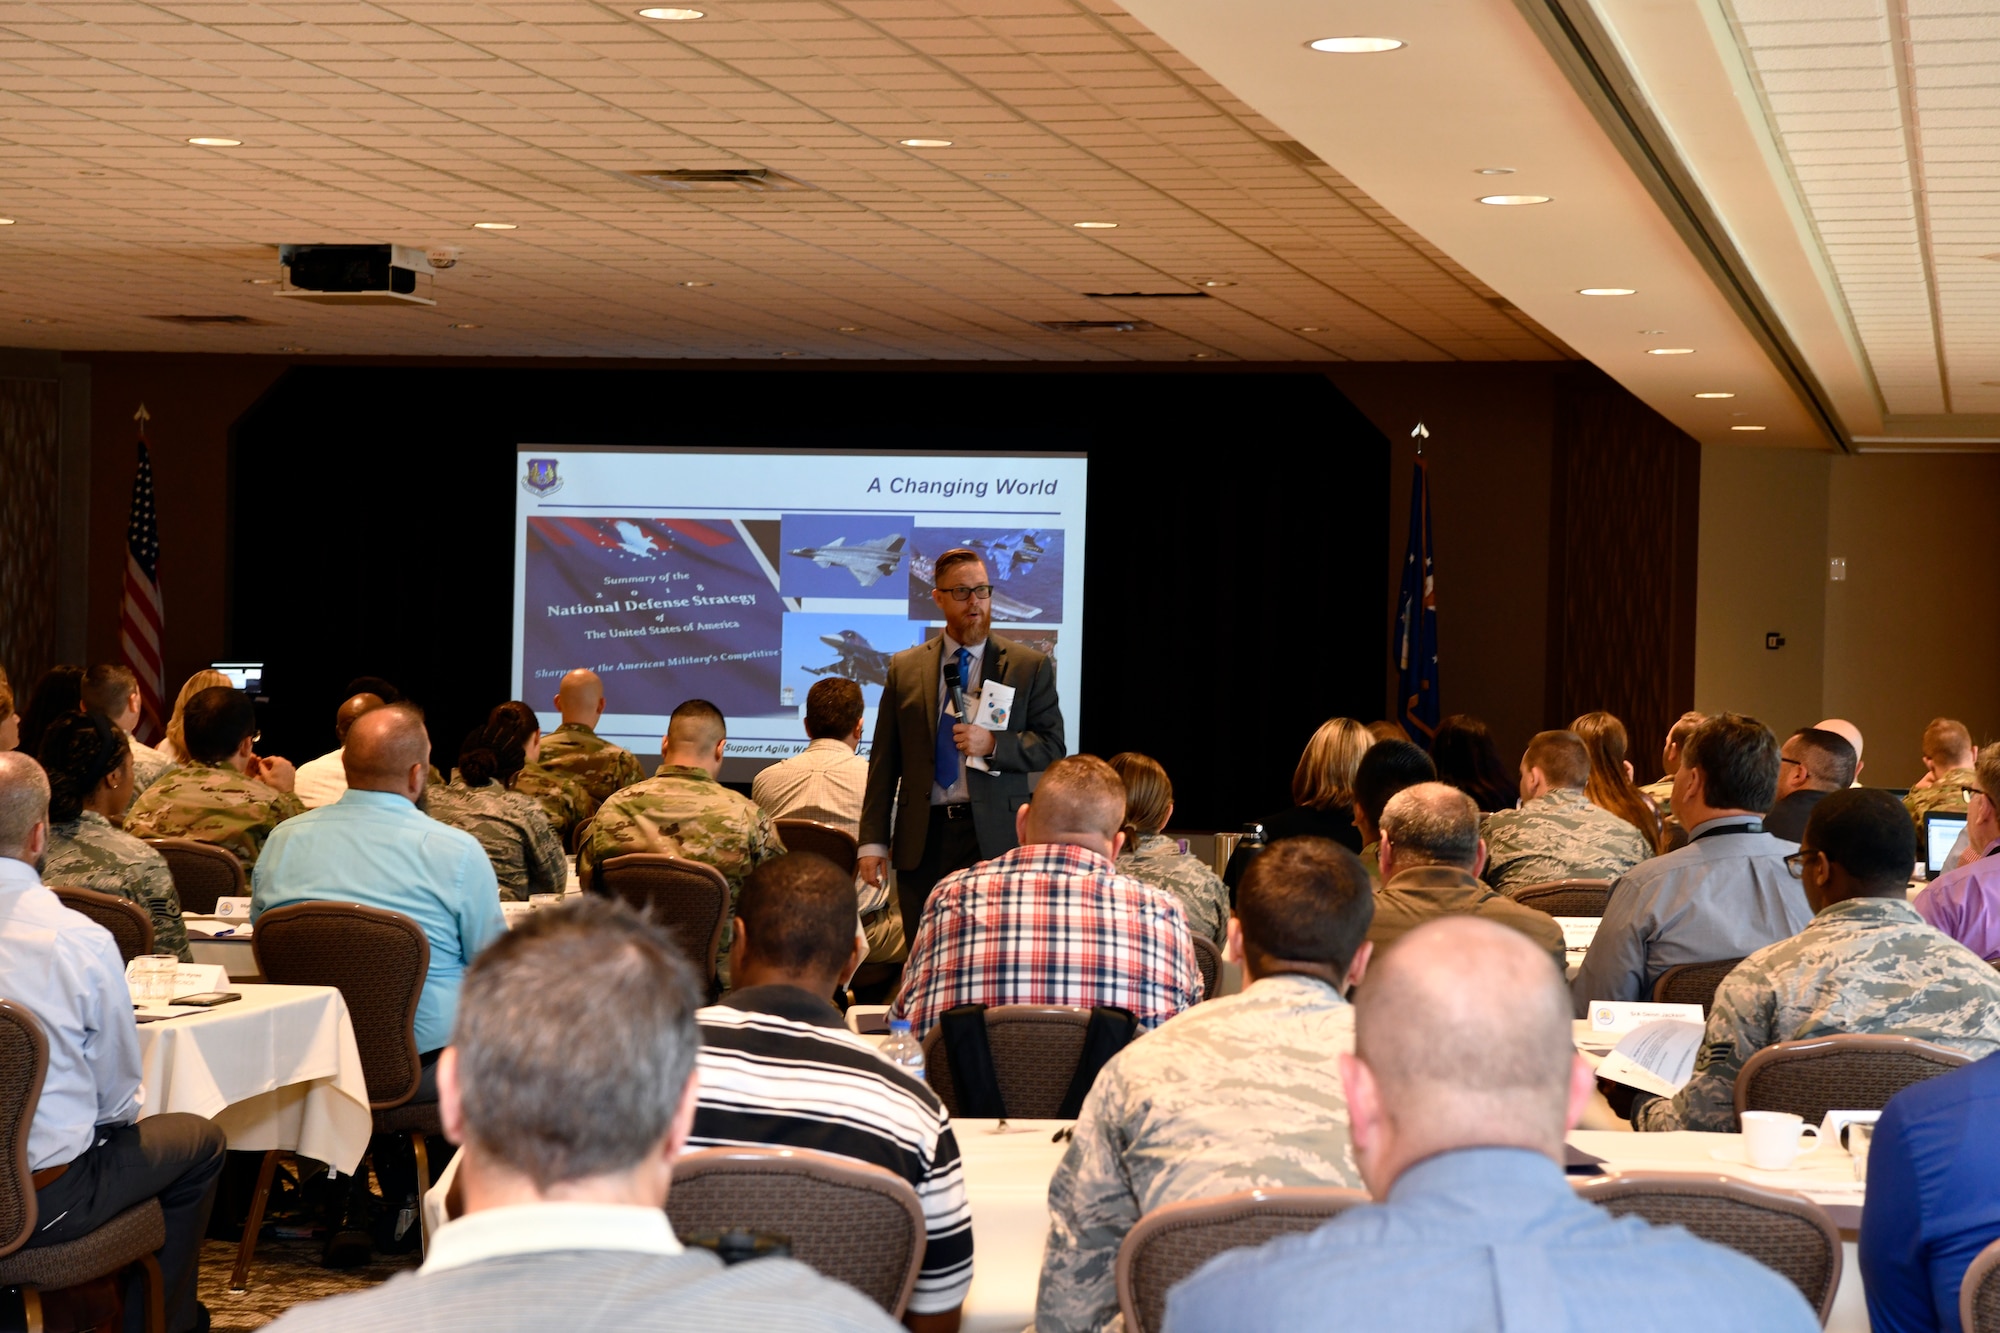 Yancy Mailes, Air Force Materiel Command historian, provides background information on the AFMC We Need initiative during cadre training at Wright-Patterson Air Force Base, July 15. More than 150 AFMC headquarters and center augmentees attended the training to prepare for the implementation of Phase II activities of the AFMC We Need initiative.